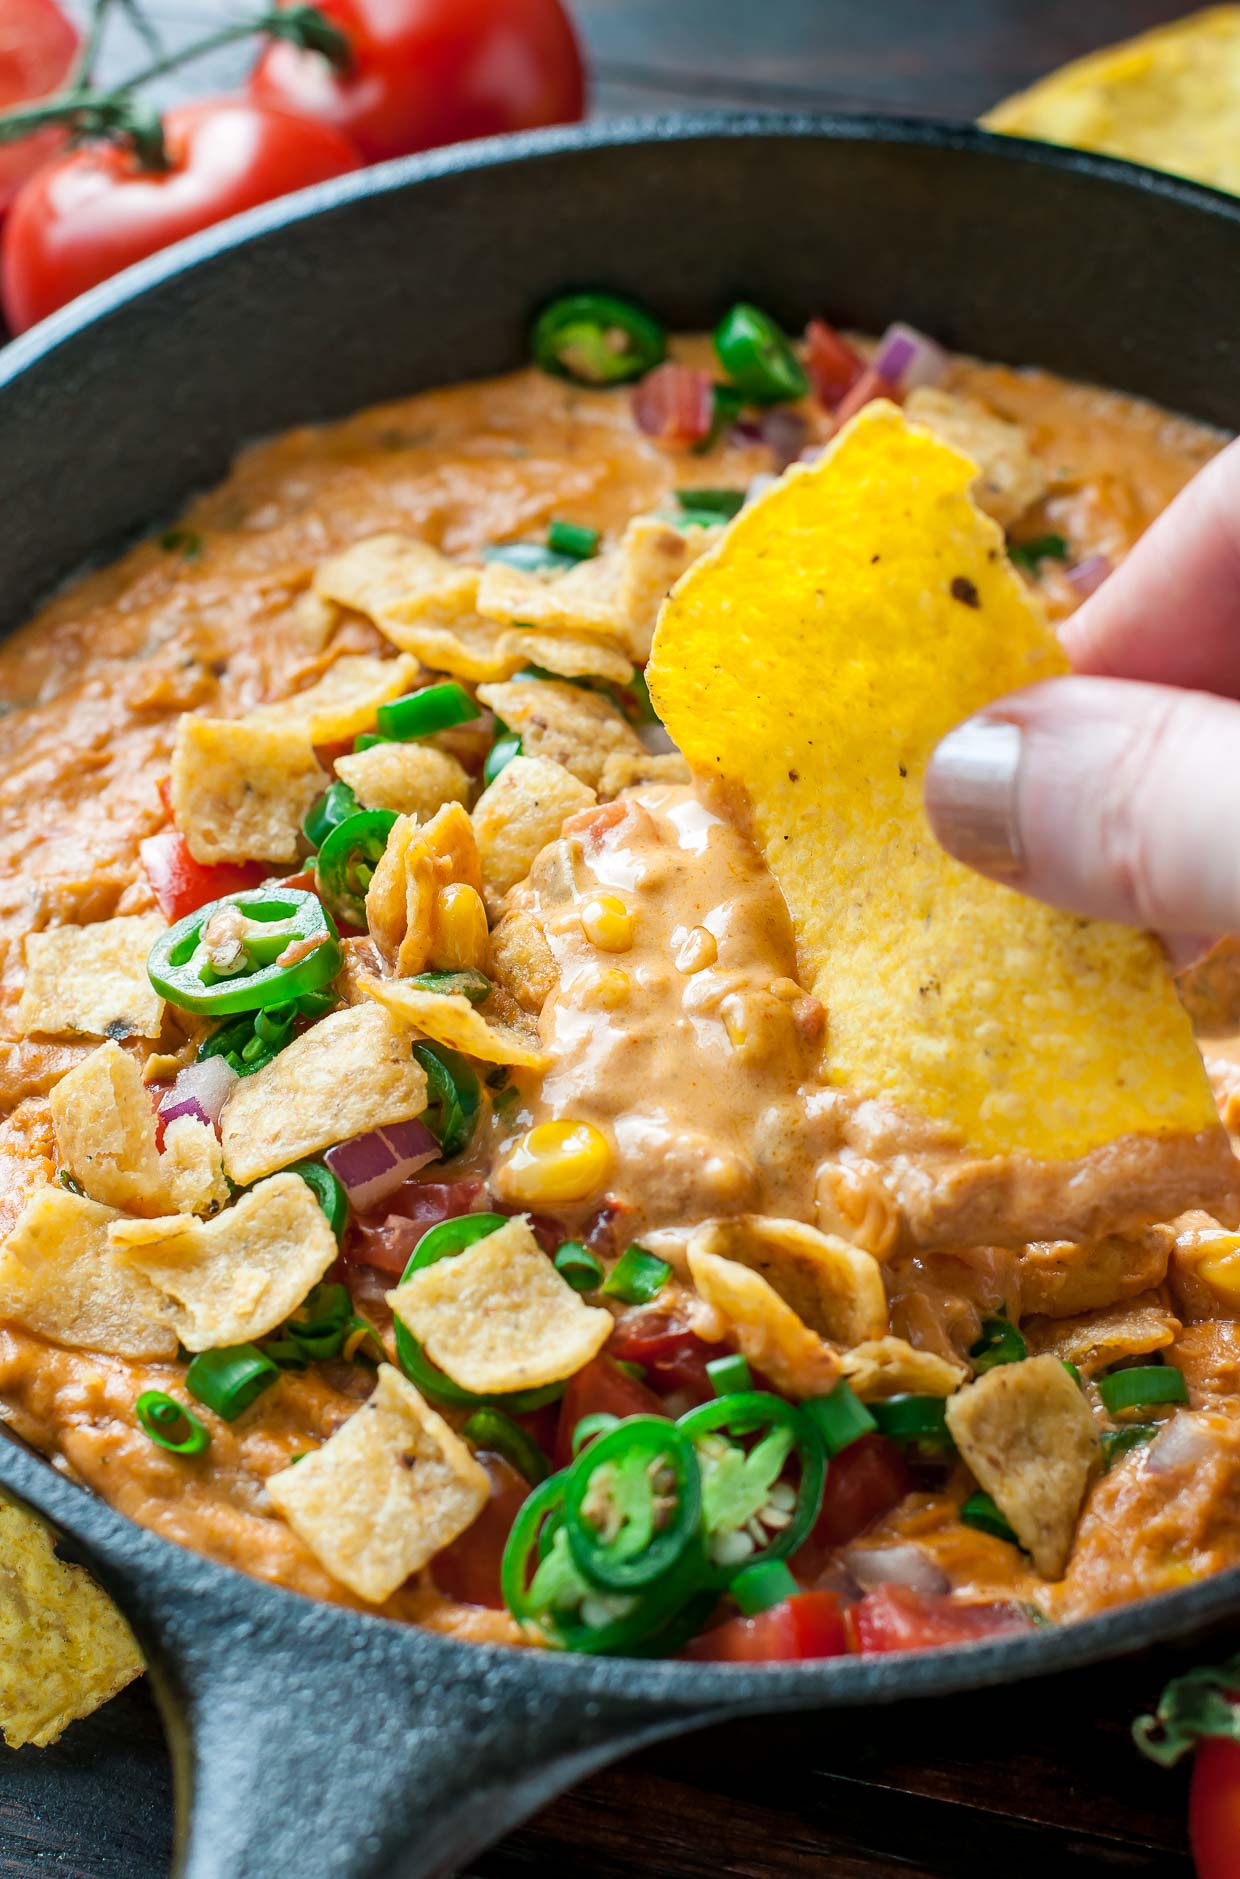 Easy Vegetarian Chili Cheese Dip... with NO VELVEETA! This easy cheesy dip is sketch-free and delicious!